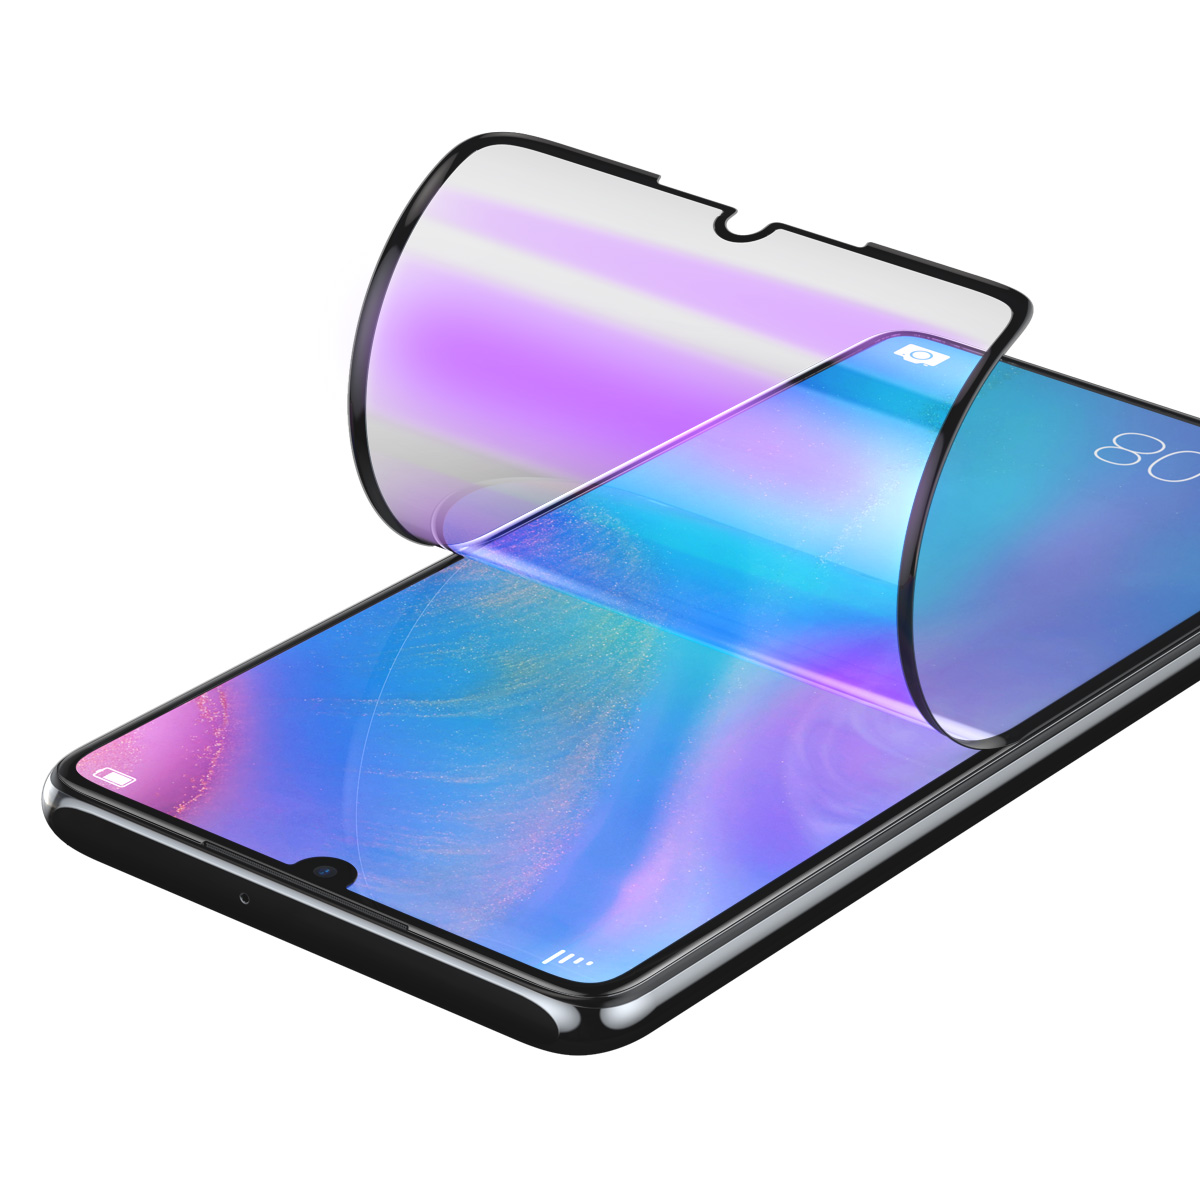 

Baseus 2PCS 0.15mm Full-cover Curved High Definition Anti-explosion Soft Screen Protector For Huawei P30